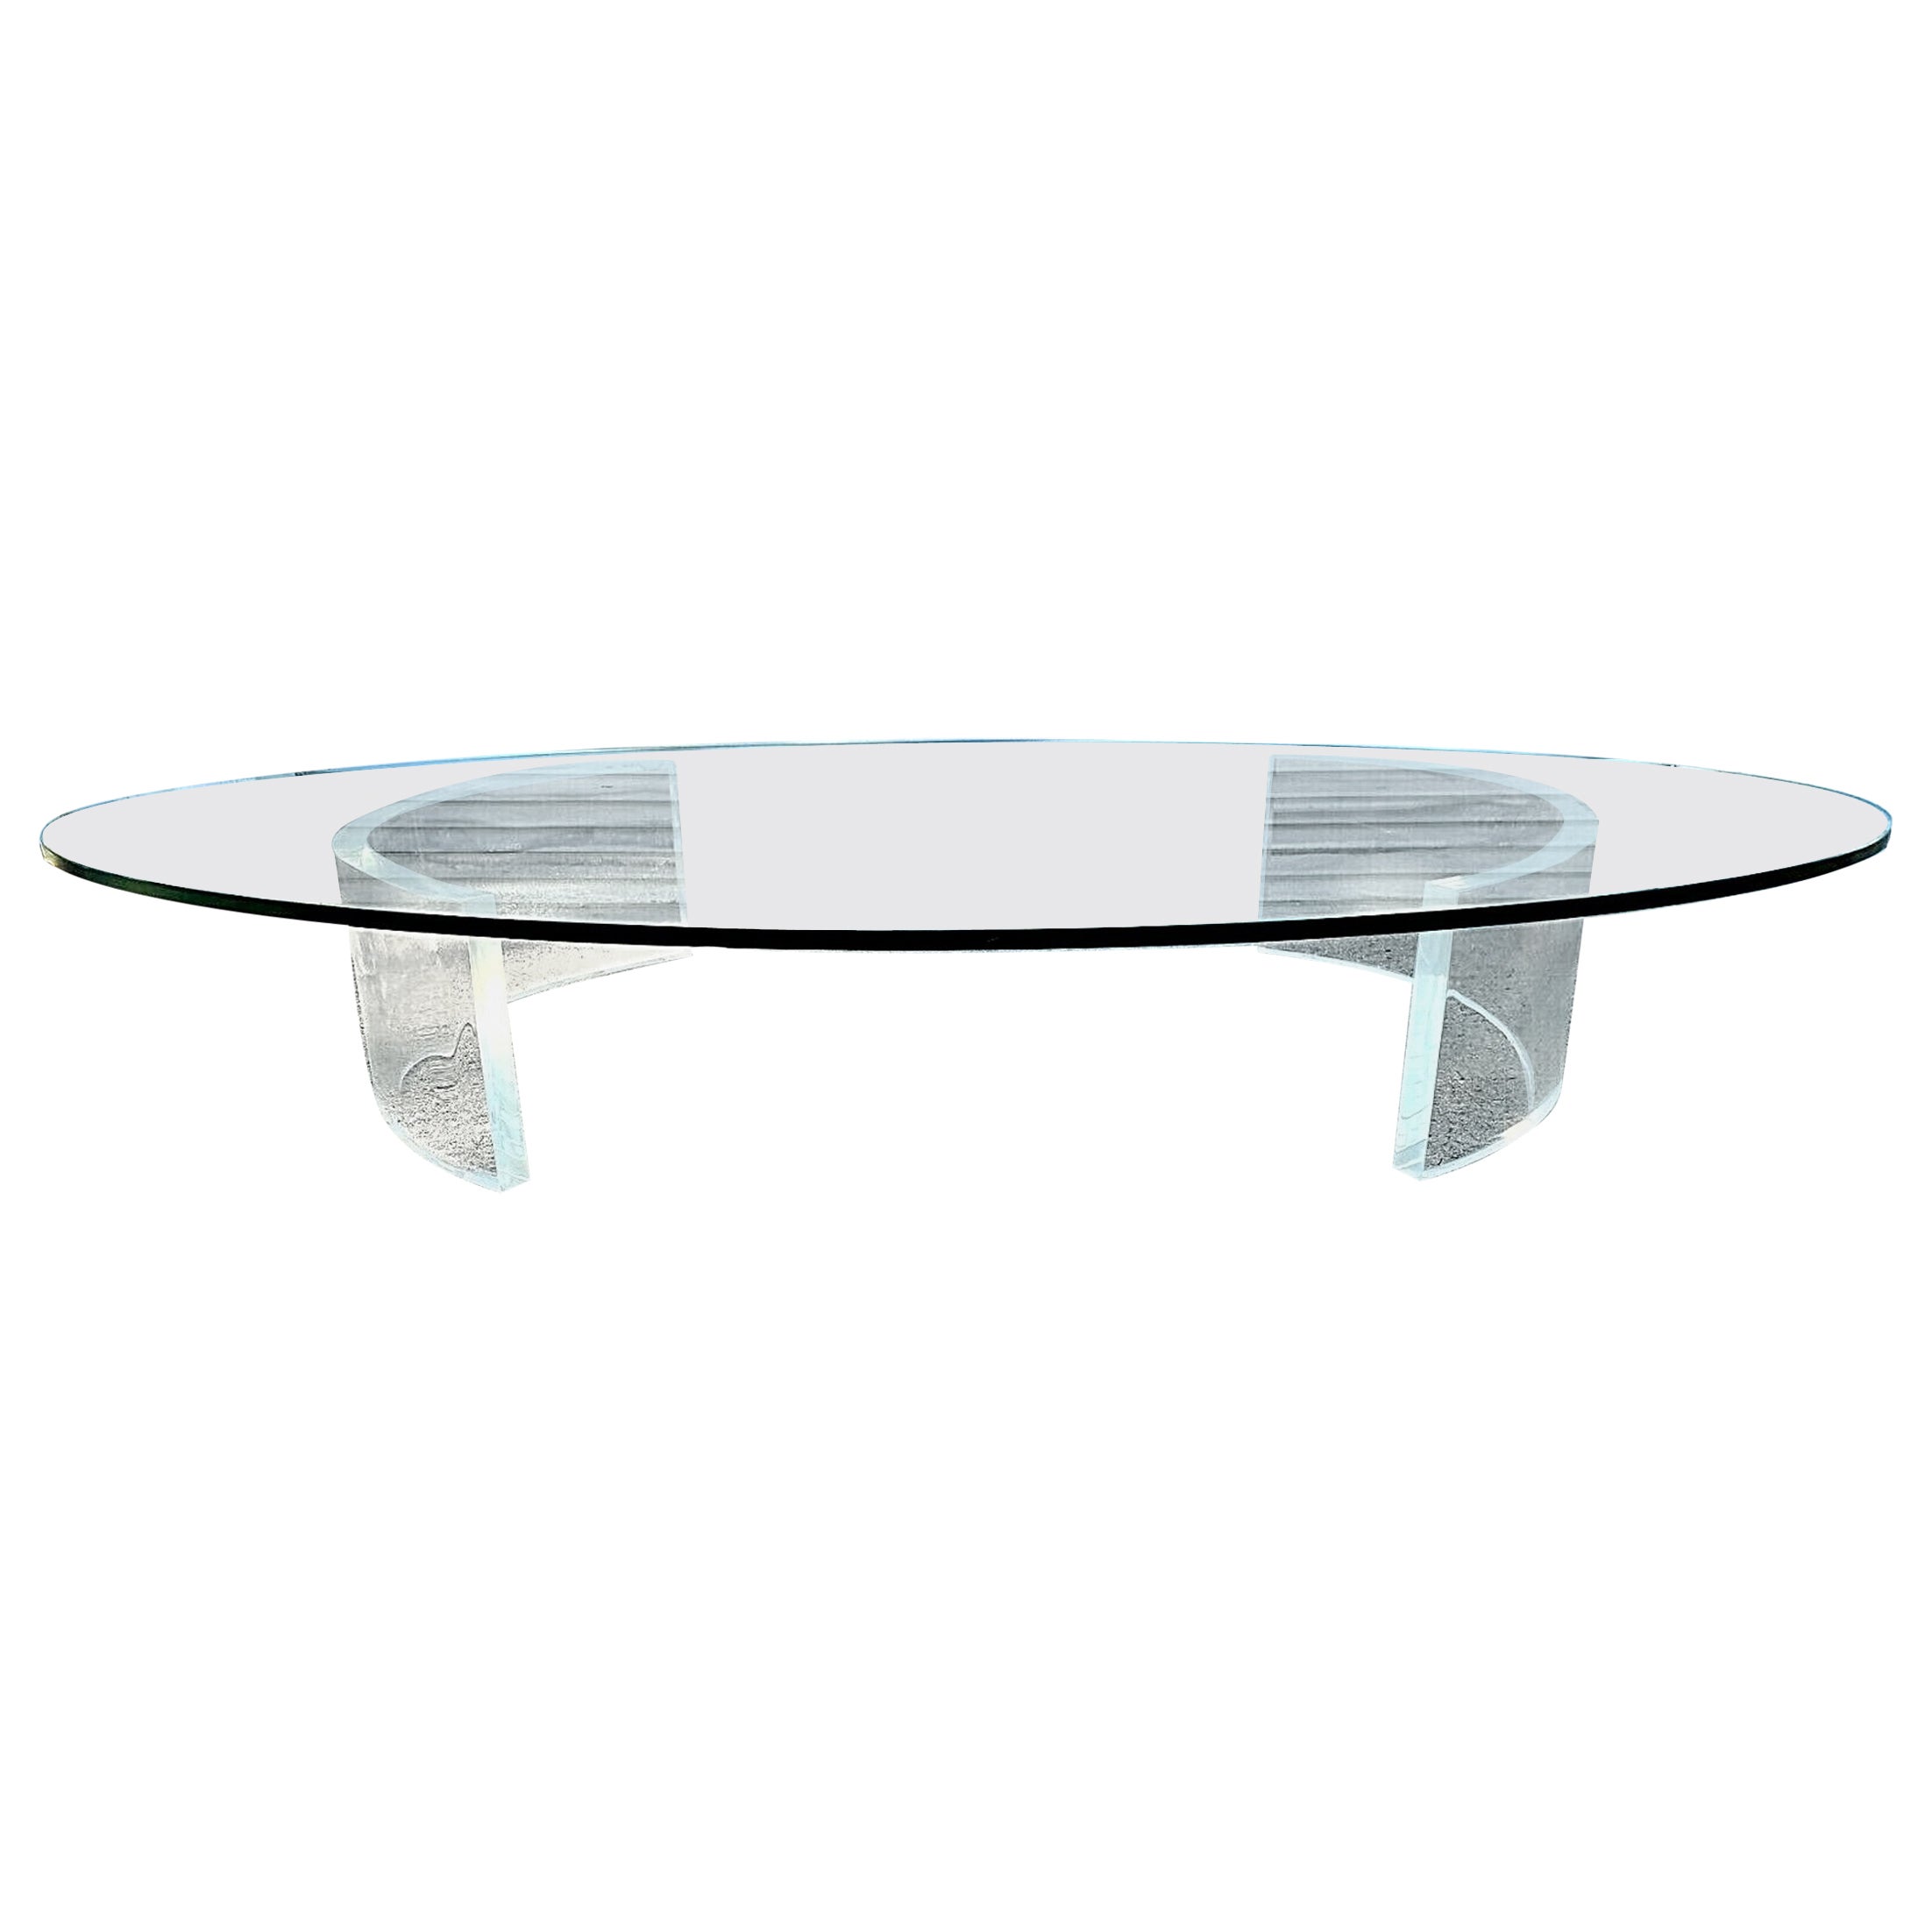 Huge 8 Foot Curved Lucite Pedestal & Oval Glass Coffee Cocktail Table